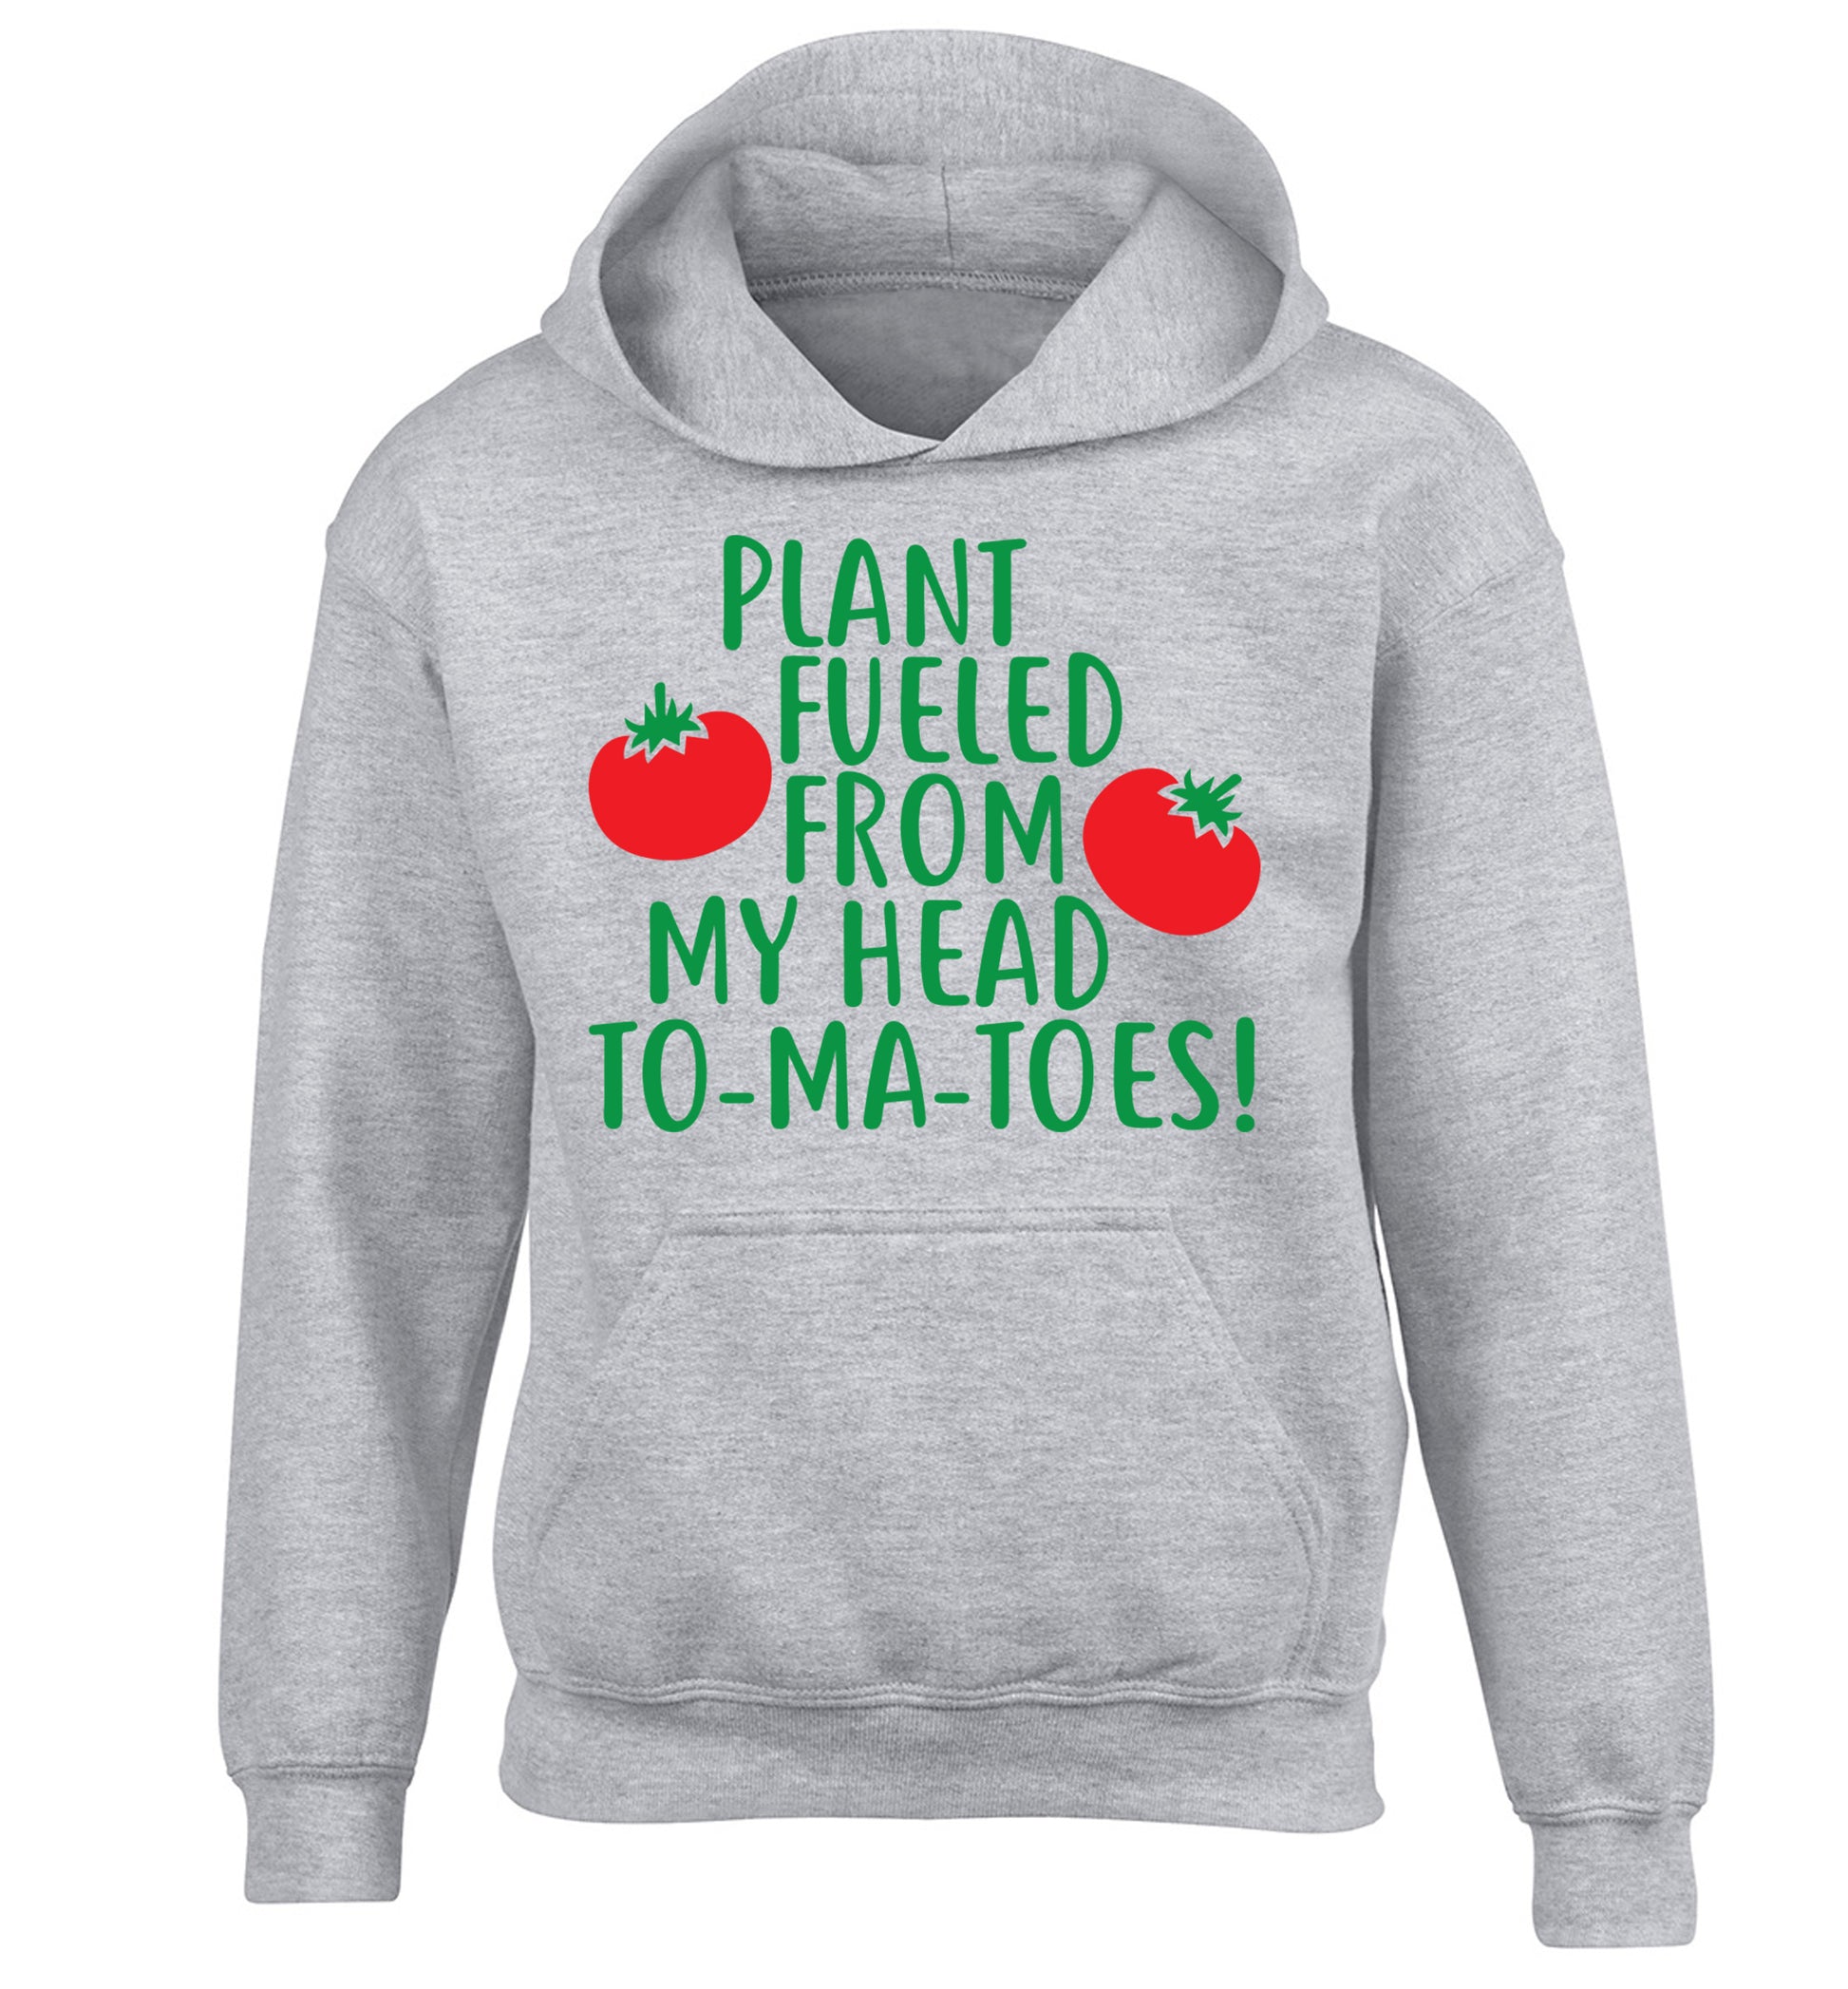 Plant fueled from my head to-ma-toes children's grey hoodie 12-14 Years